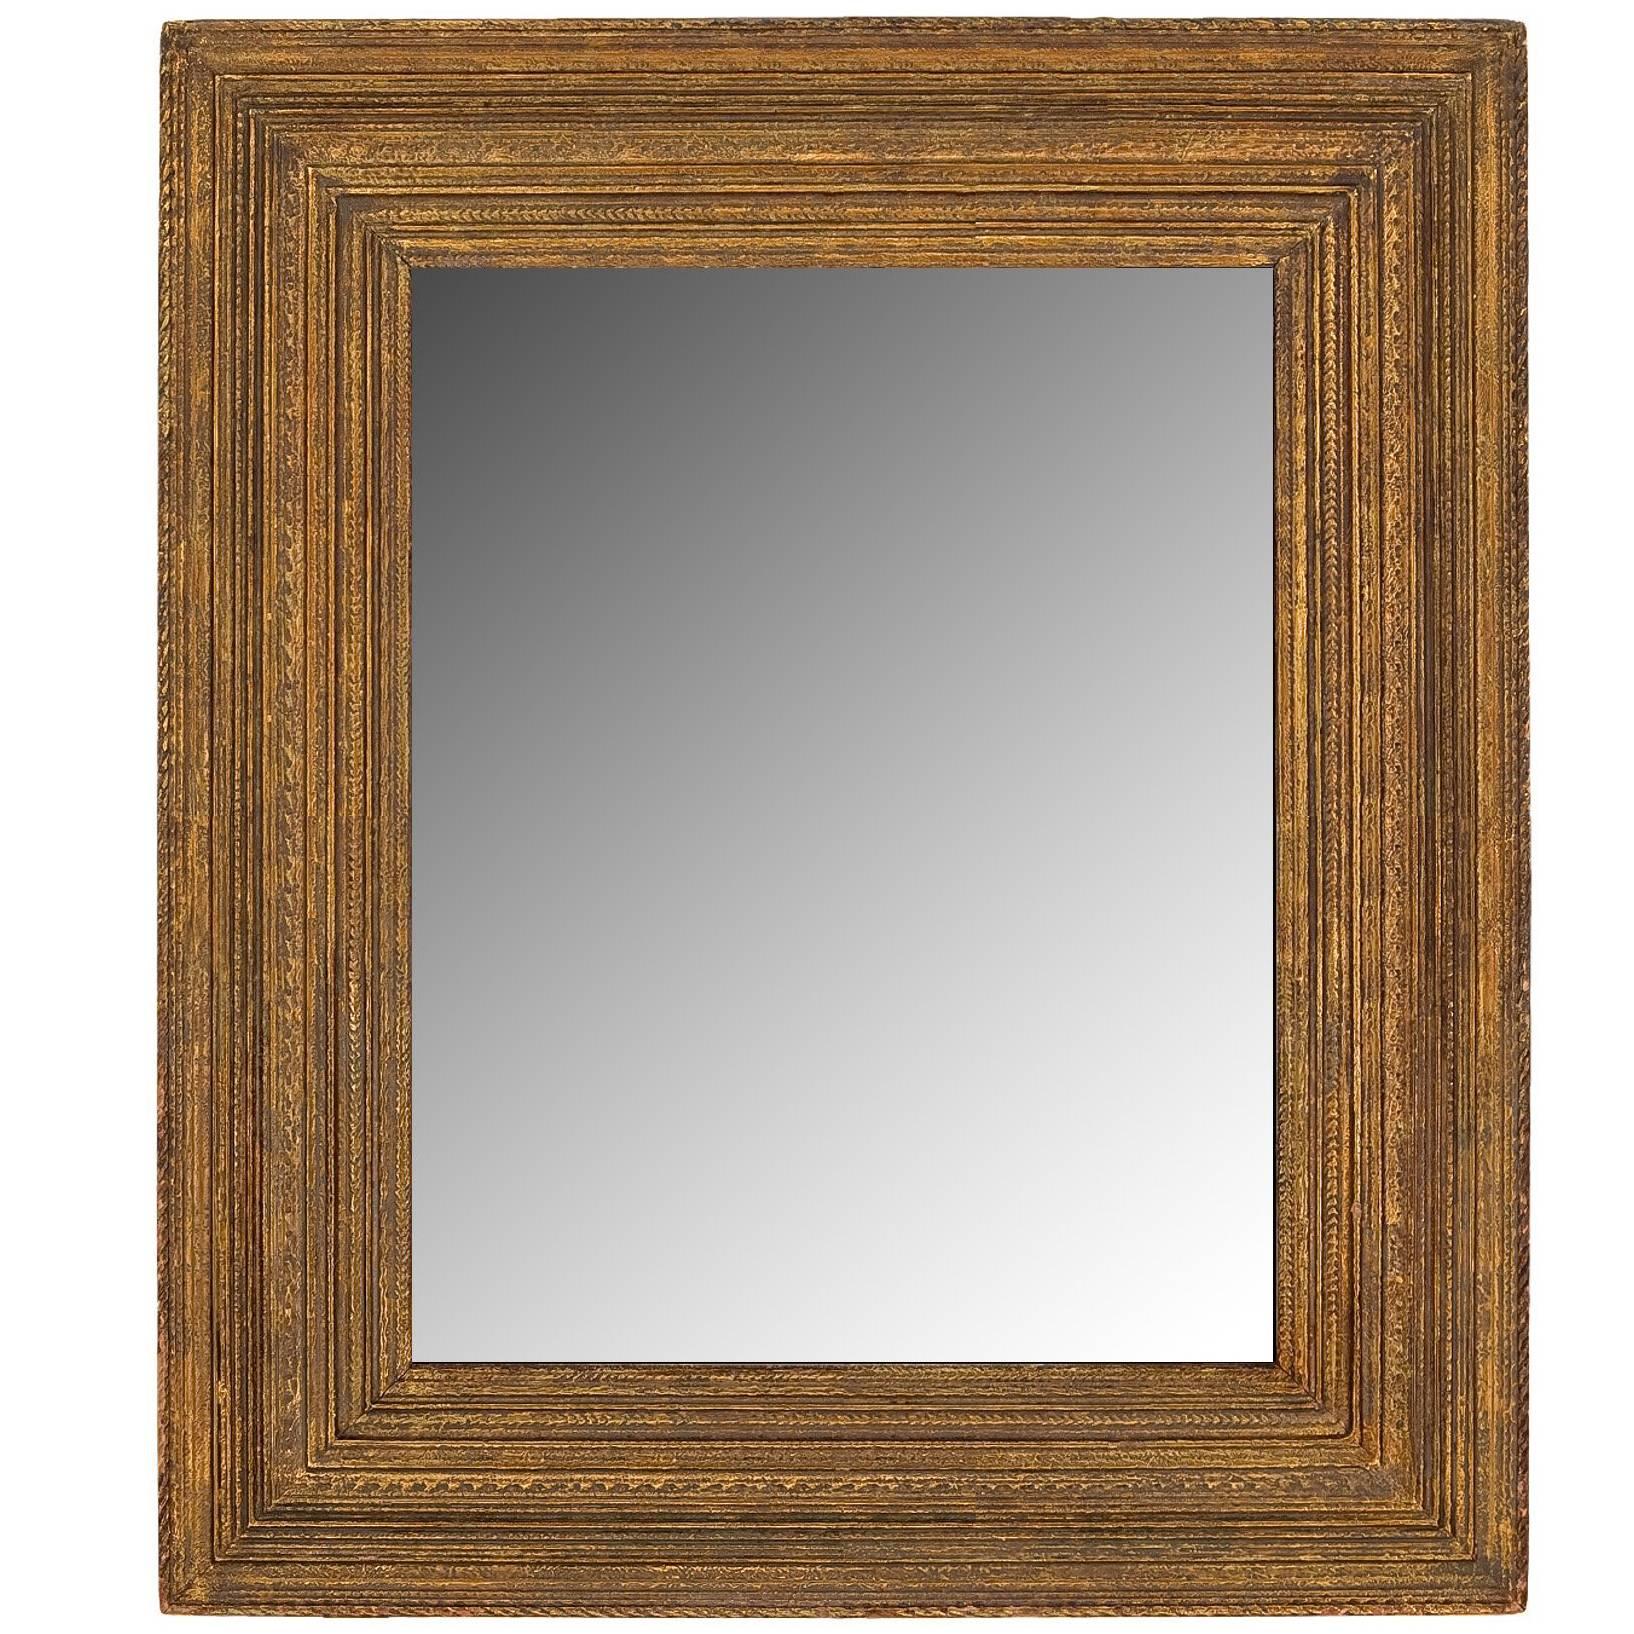 Stanford White Style Mirror For Sale